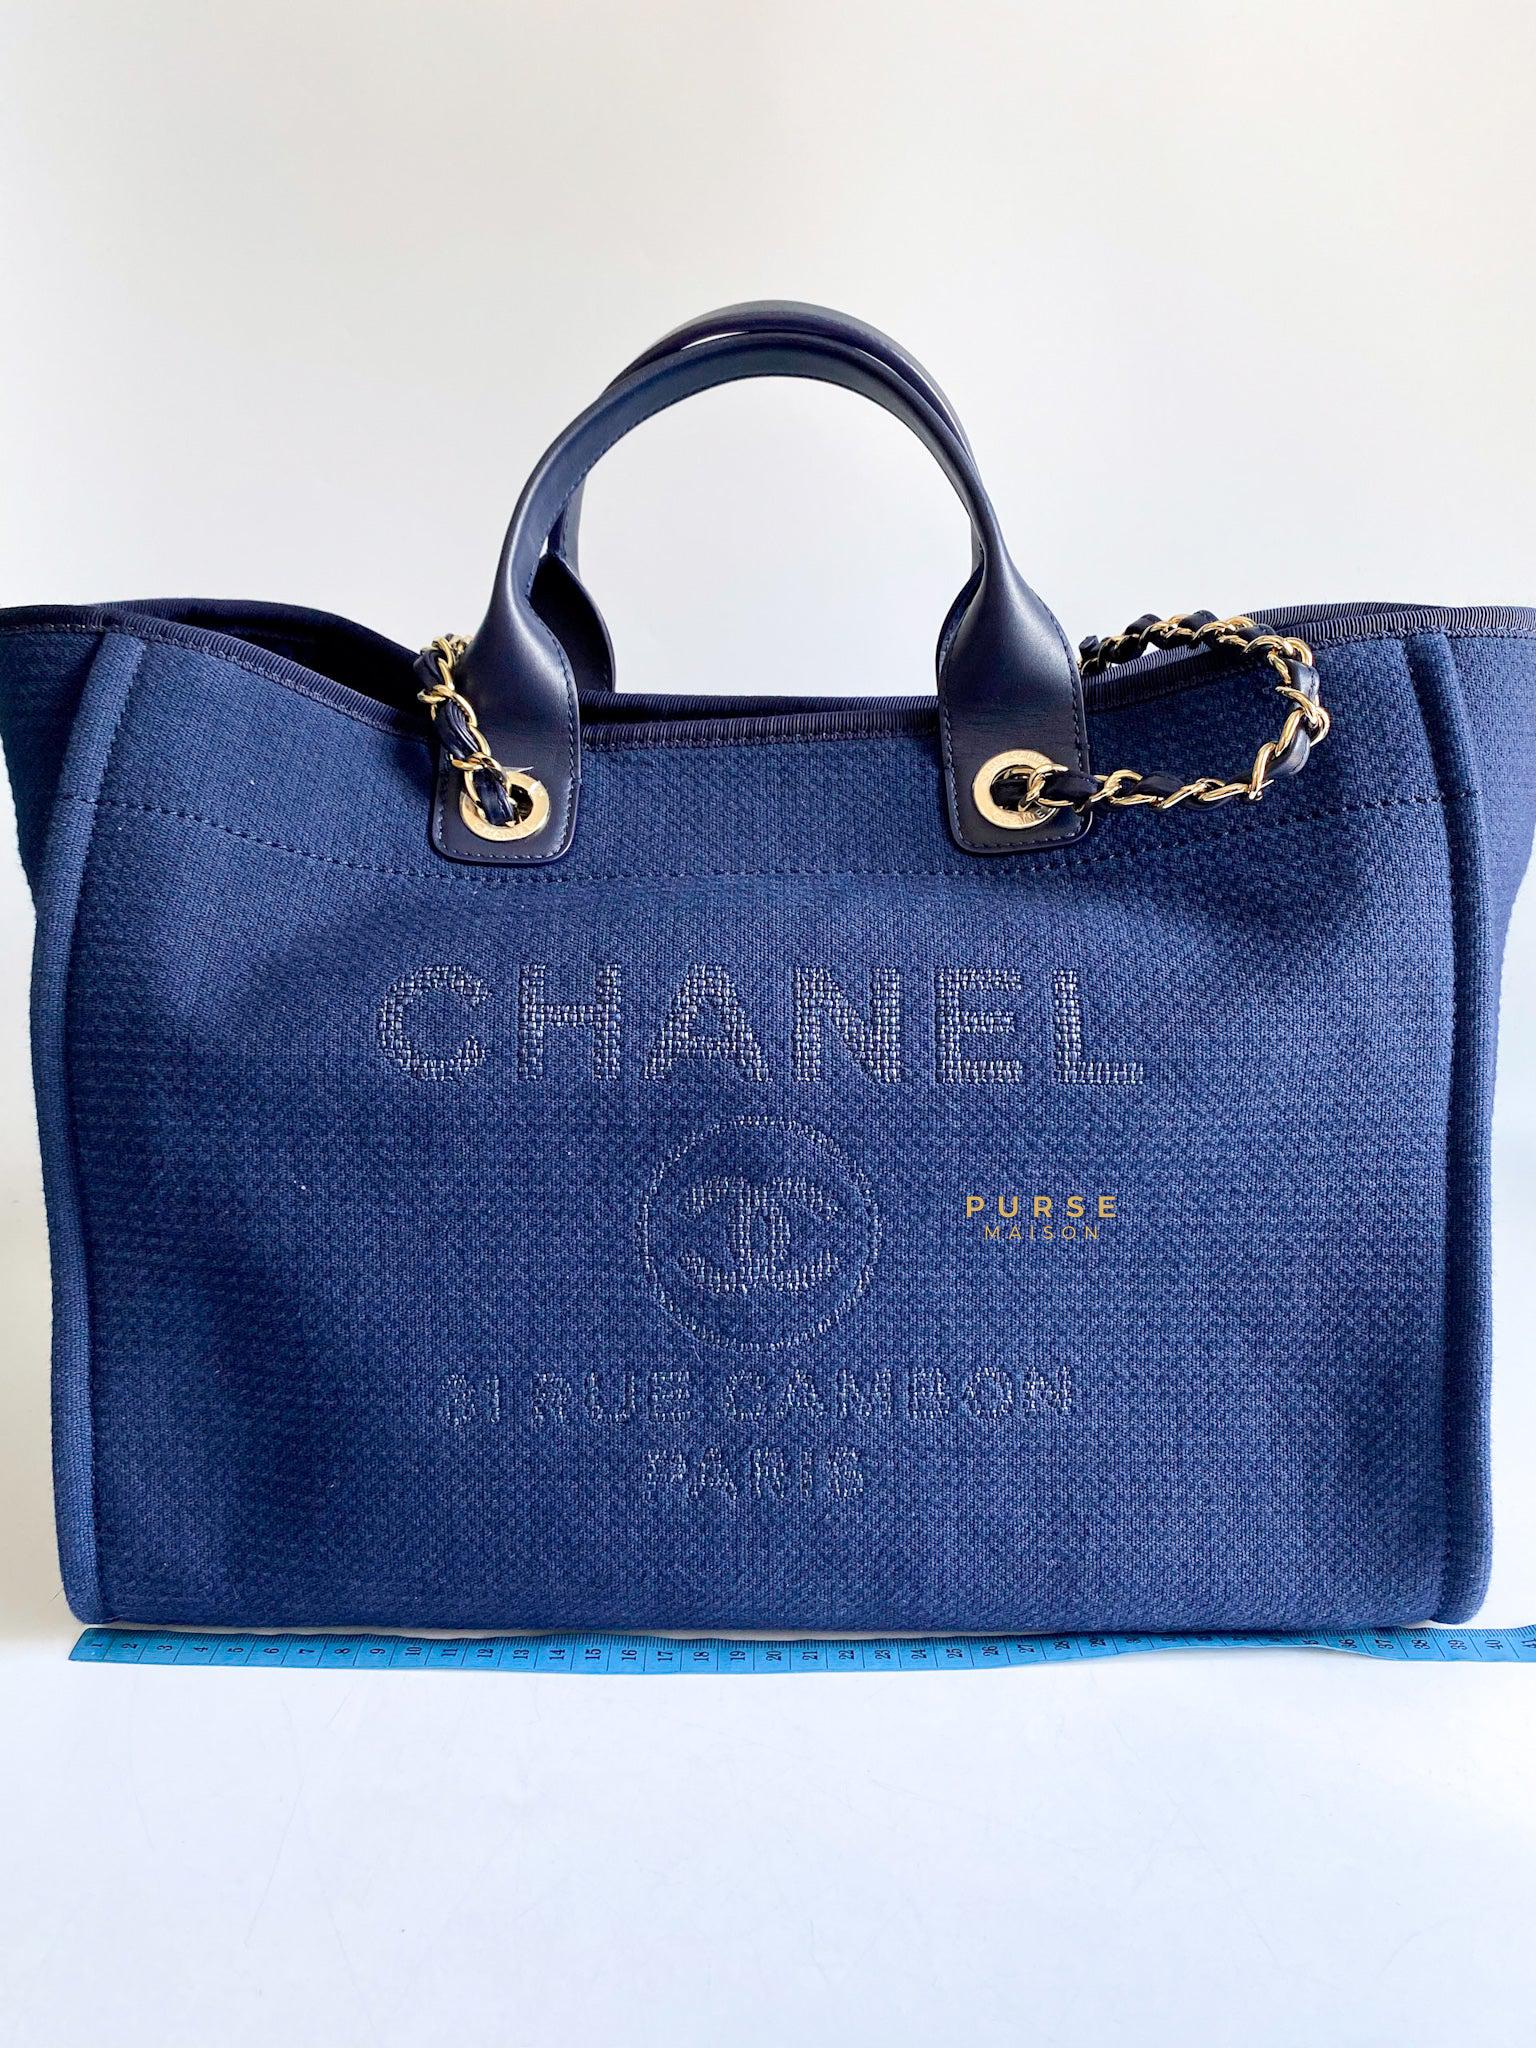 New 22B CHANEL Blue LARGE Shopping Deauville Tote Pouch Bag MICROCHIP